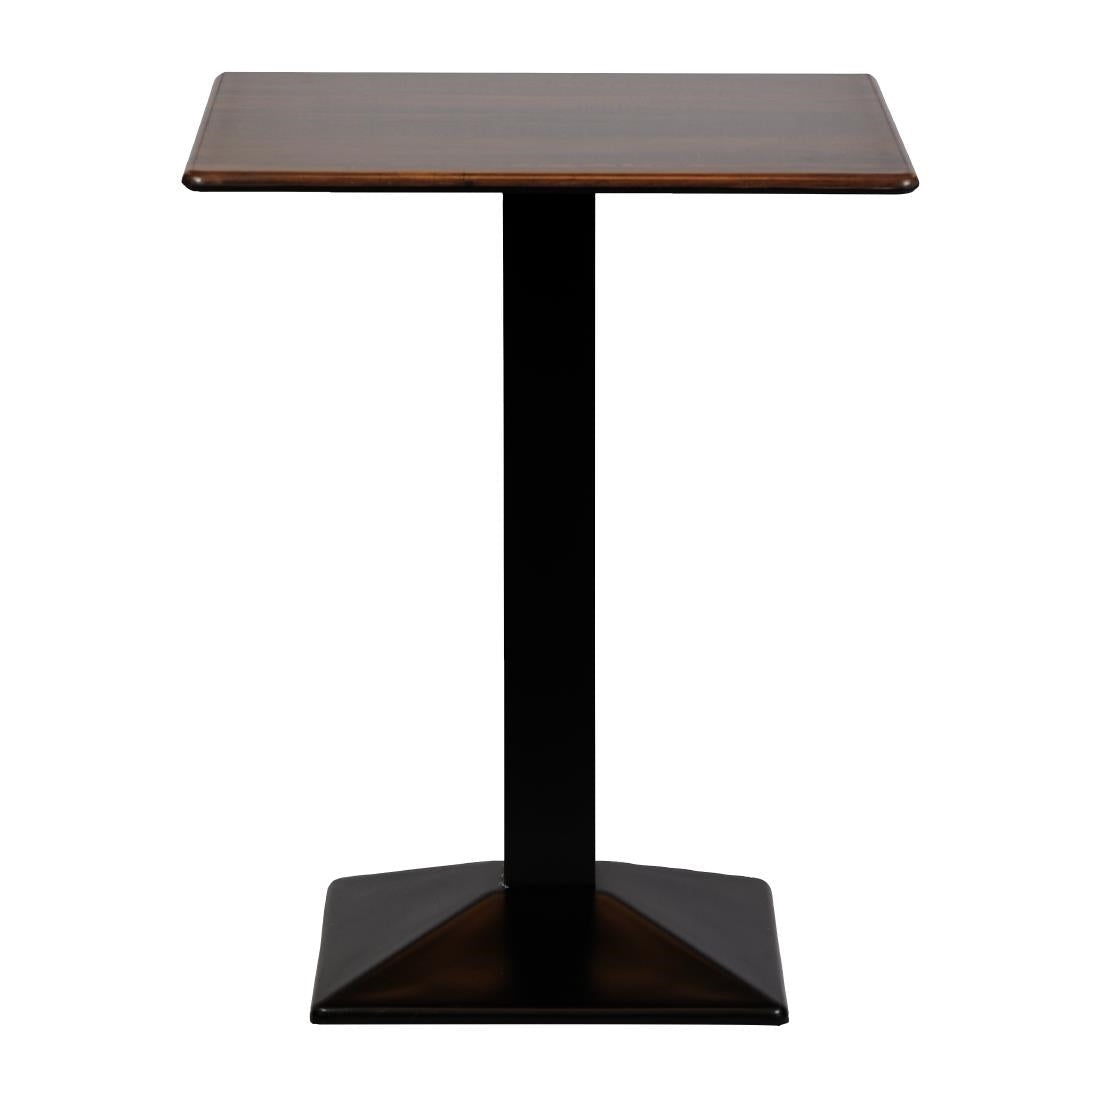 CZ833 Turin Metal Base Square Poseur Table with Laminate Top Walnut 700mm JD Catering Equipment Solutions Ltd